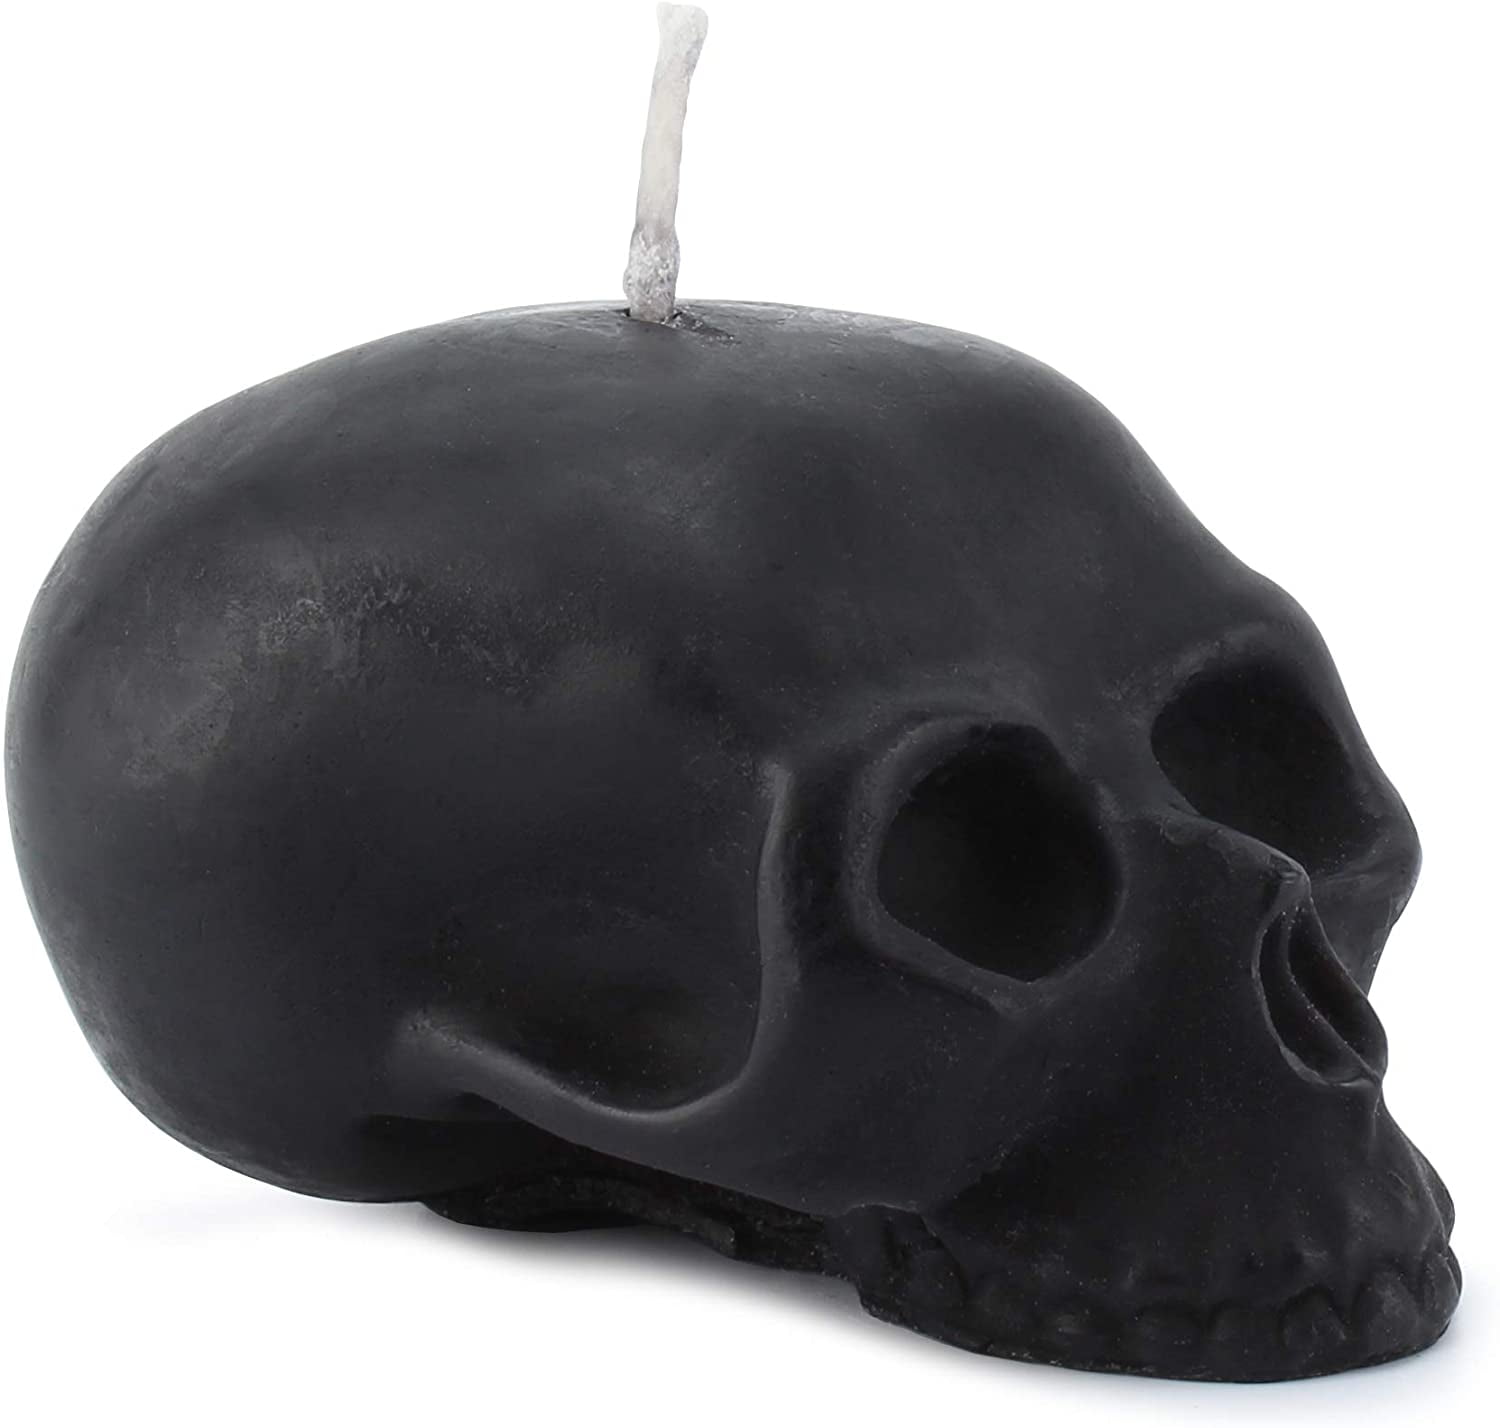 Pink or gray Skull candle with gold leaf